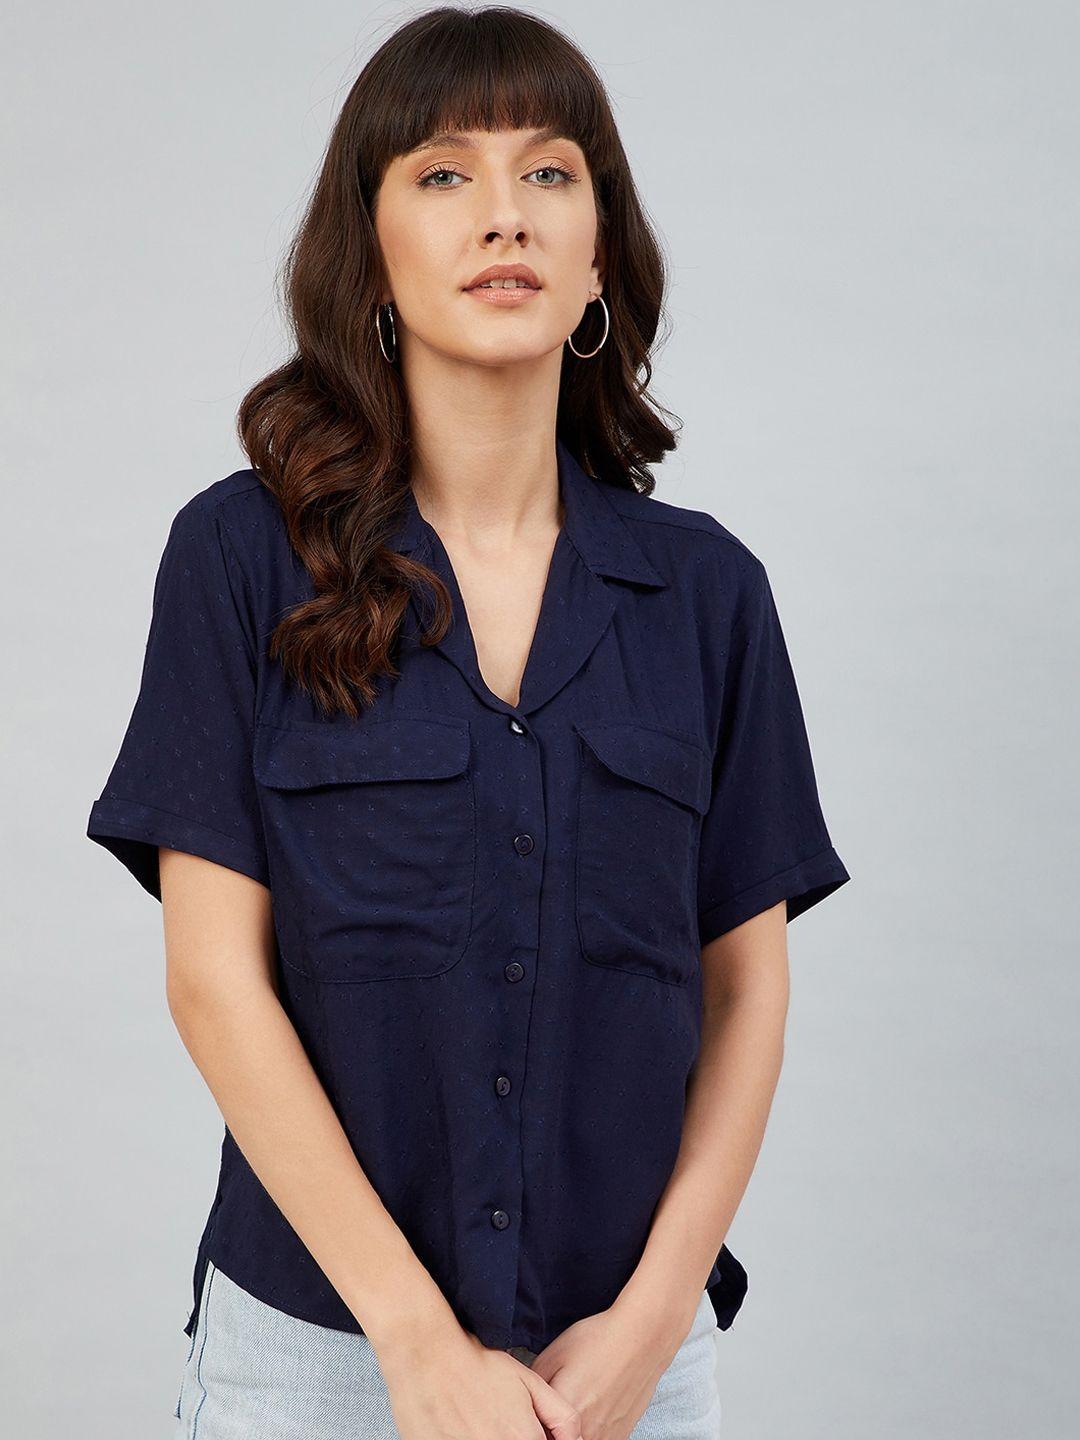 marie claire women solid navy blue casual shirt